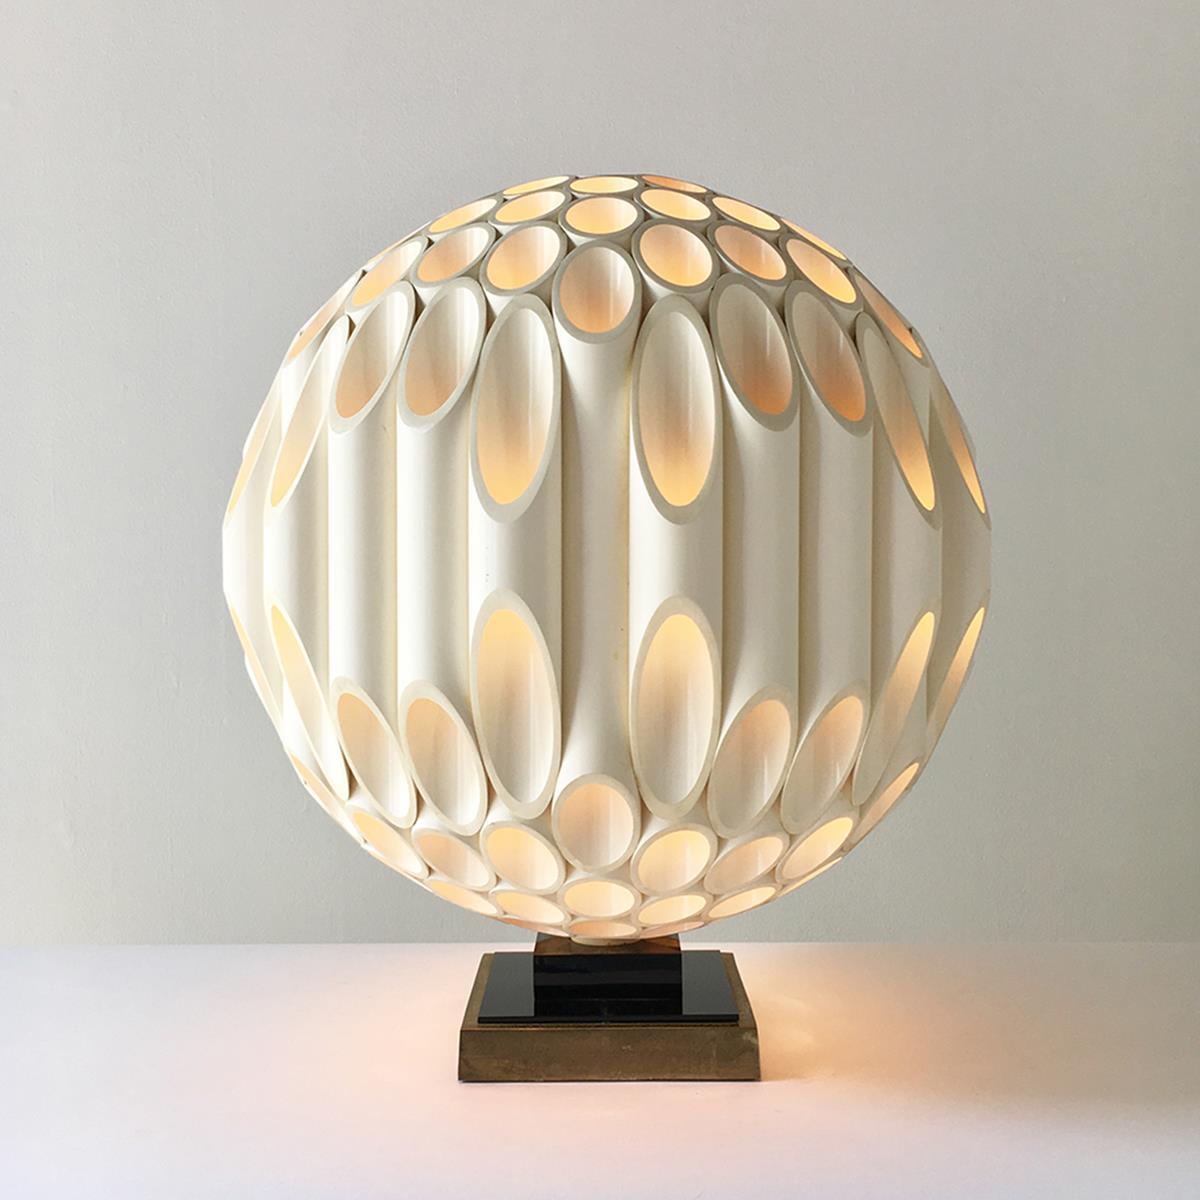 Rare spherical shaped sculptural acrylic table lamp designed by Rougier Canada, late 1970s stamped. 

As with all Rougier lights, created from acrylic but made to appear as bamboo this sculptural light has tremendous impact by day and night. It